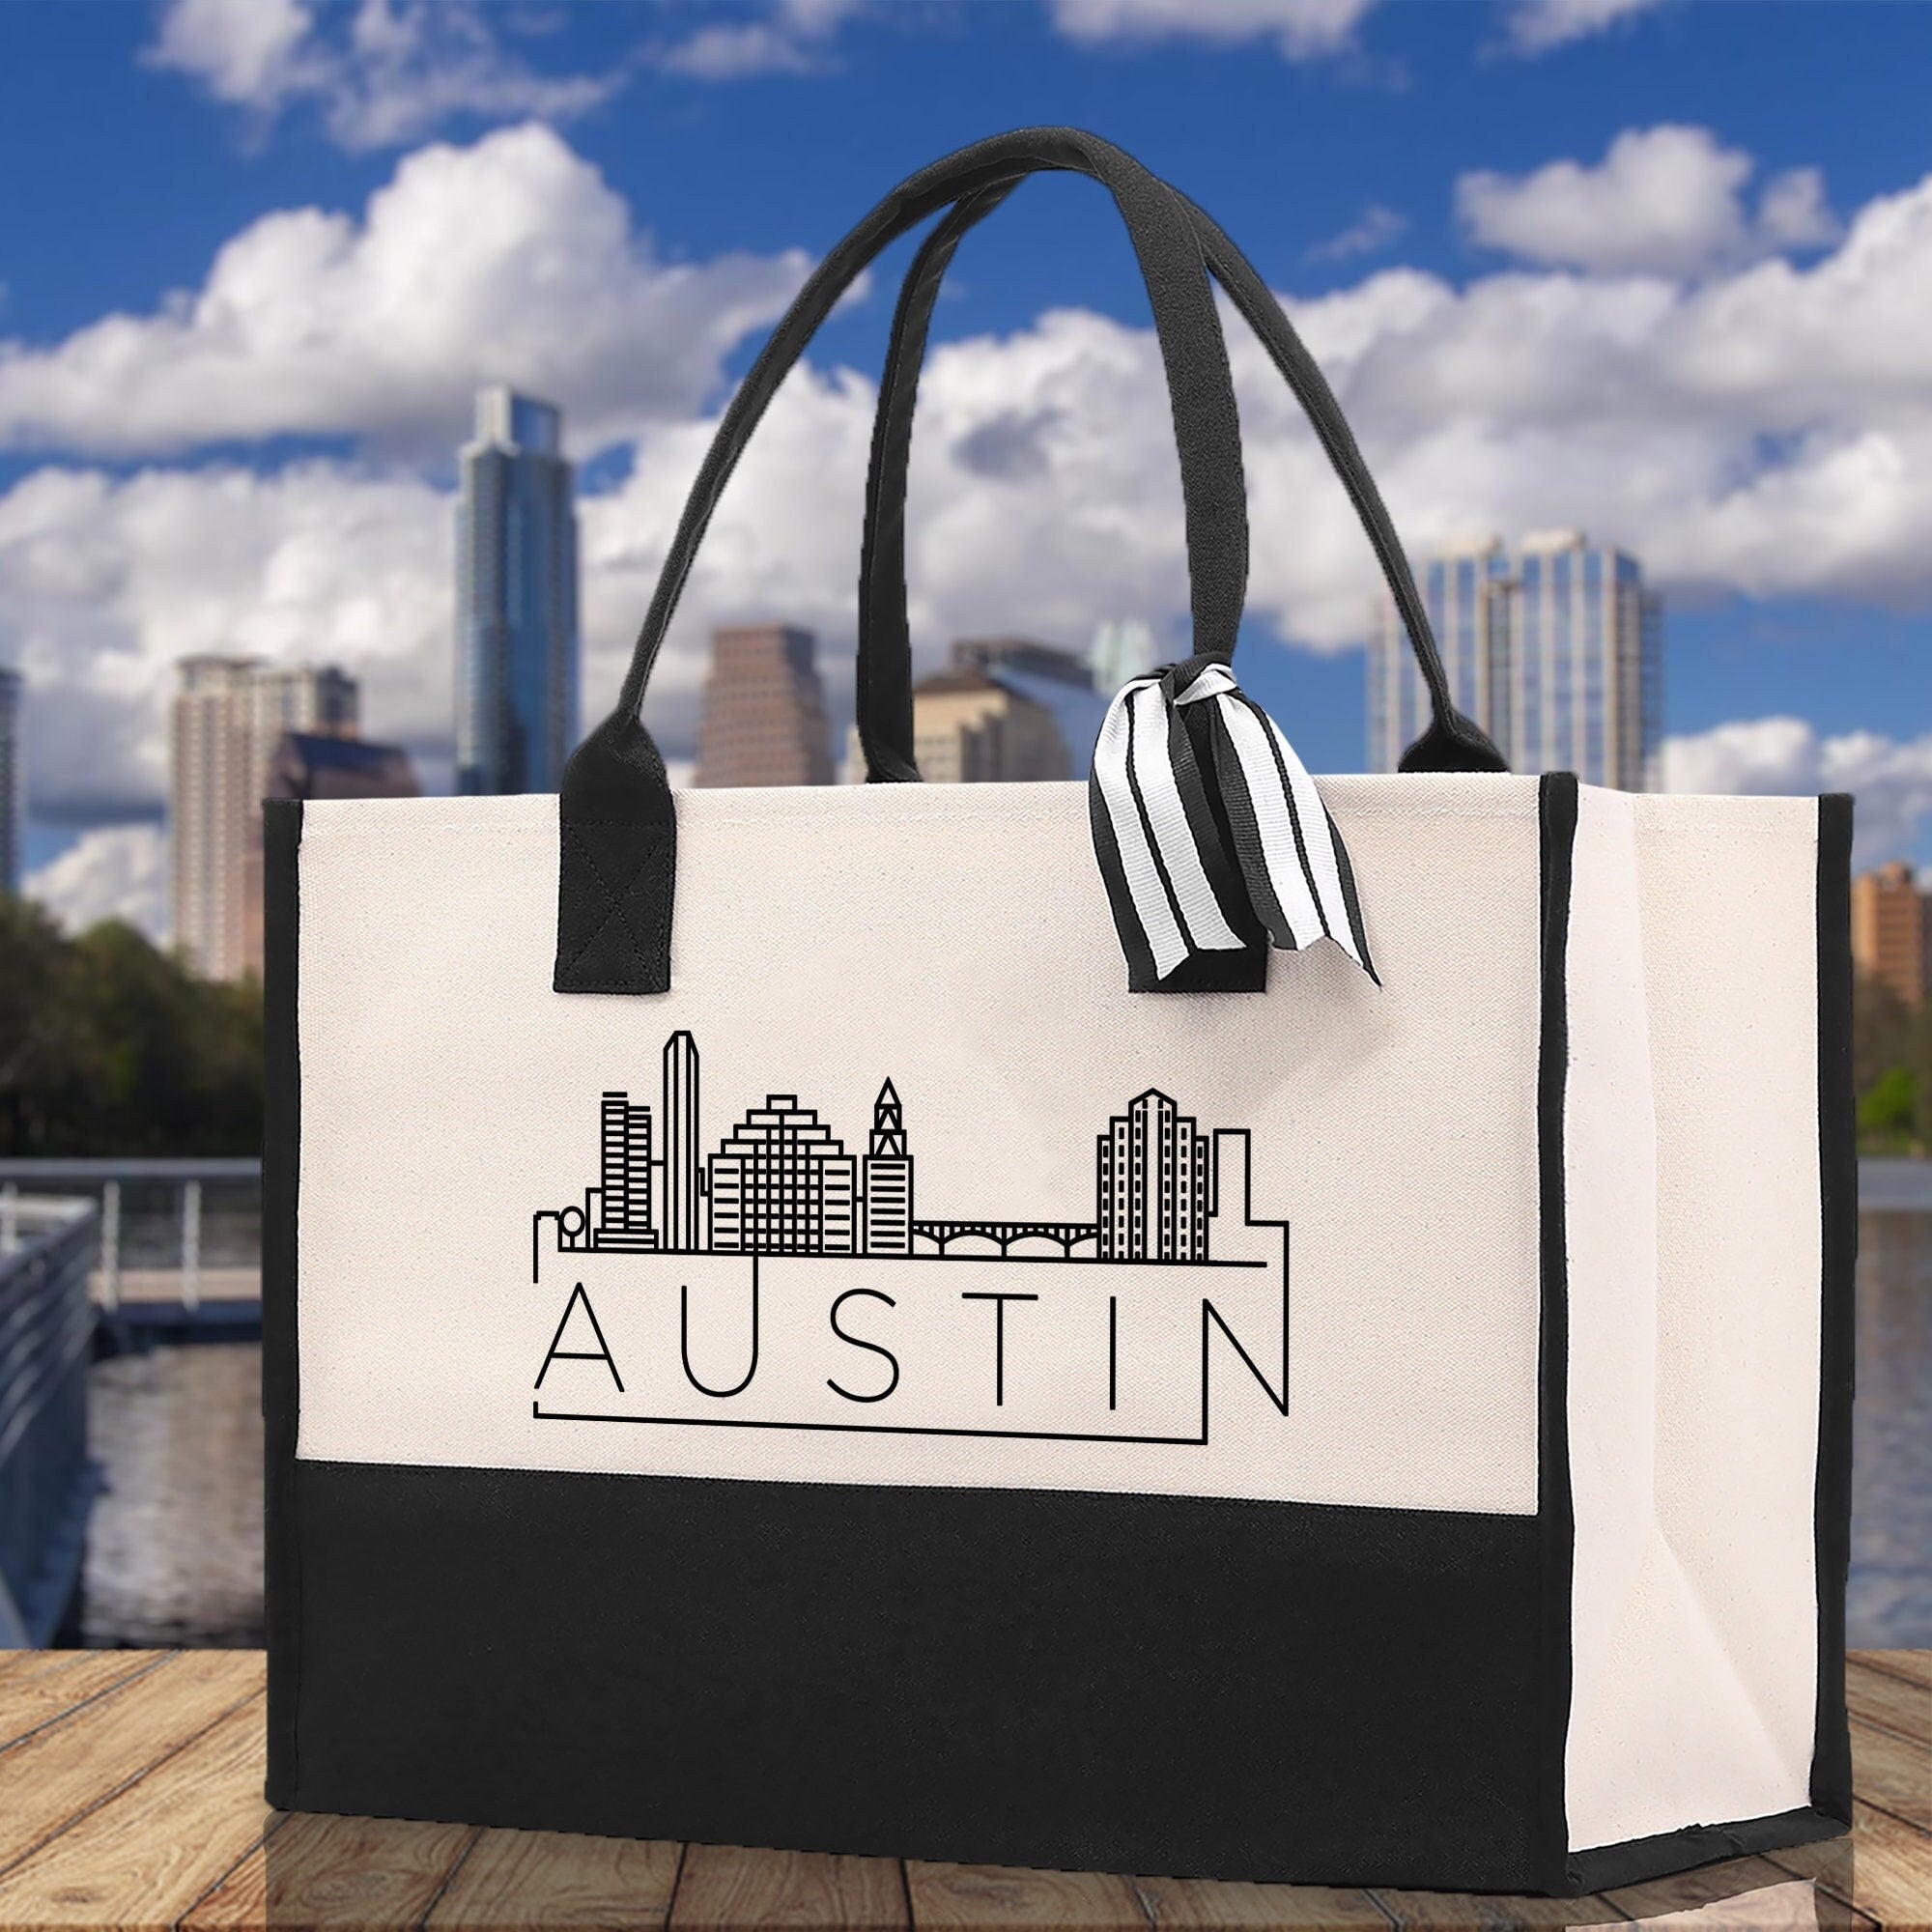 Austin Cotton Canvas Tote Bag TX Travel Vacation Tote Employee and Client Gift Wedding Favor Birthday Welcome Tote Bag Bridesmaid Gift